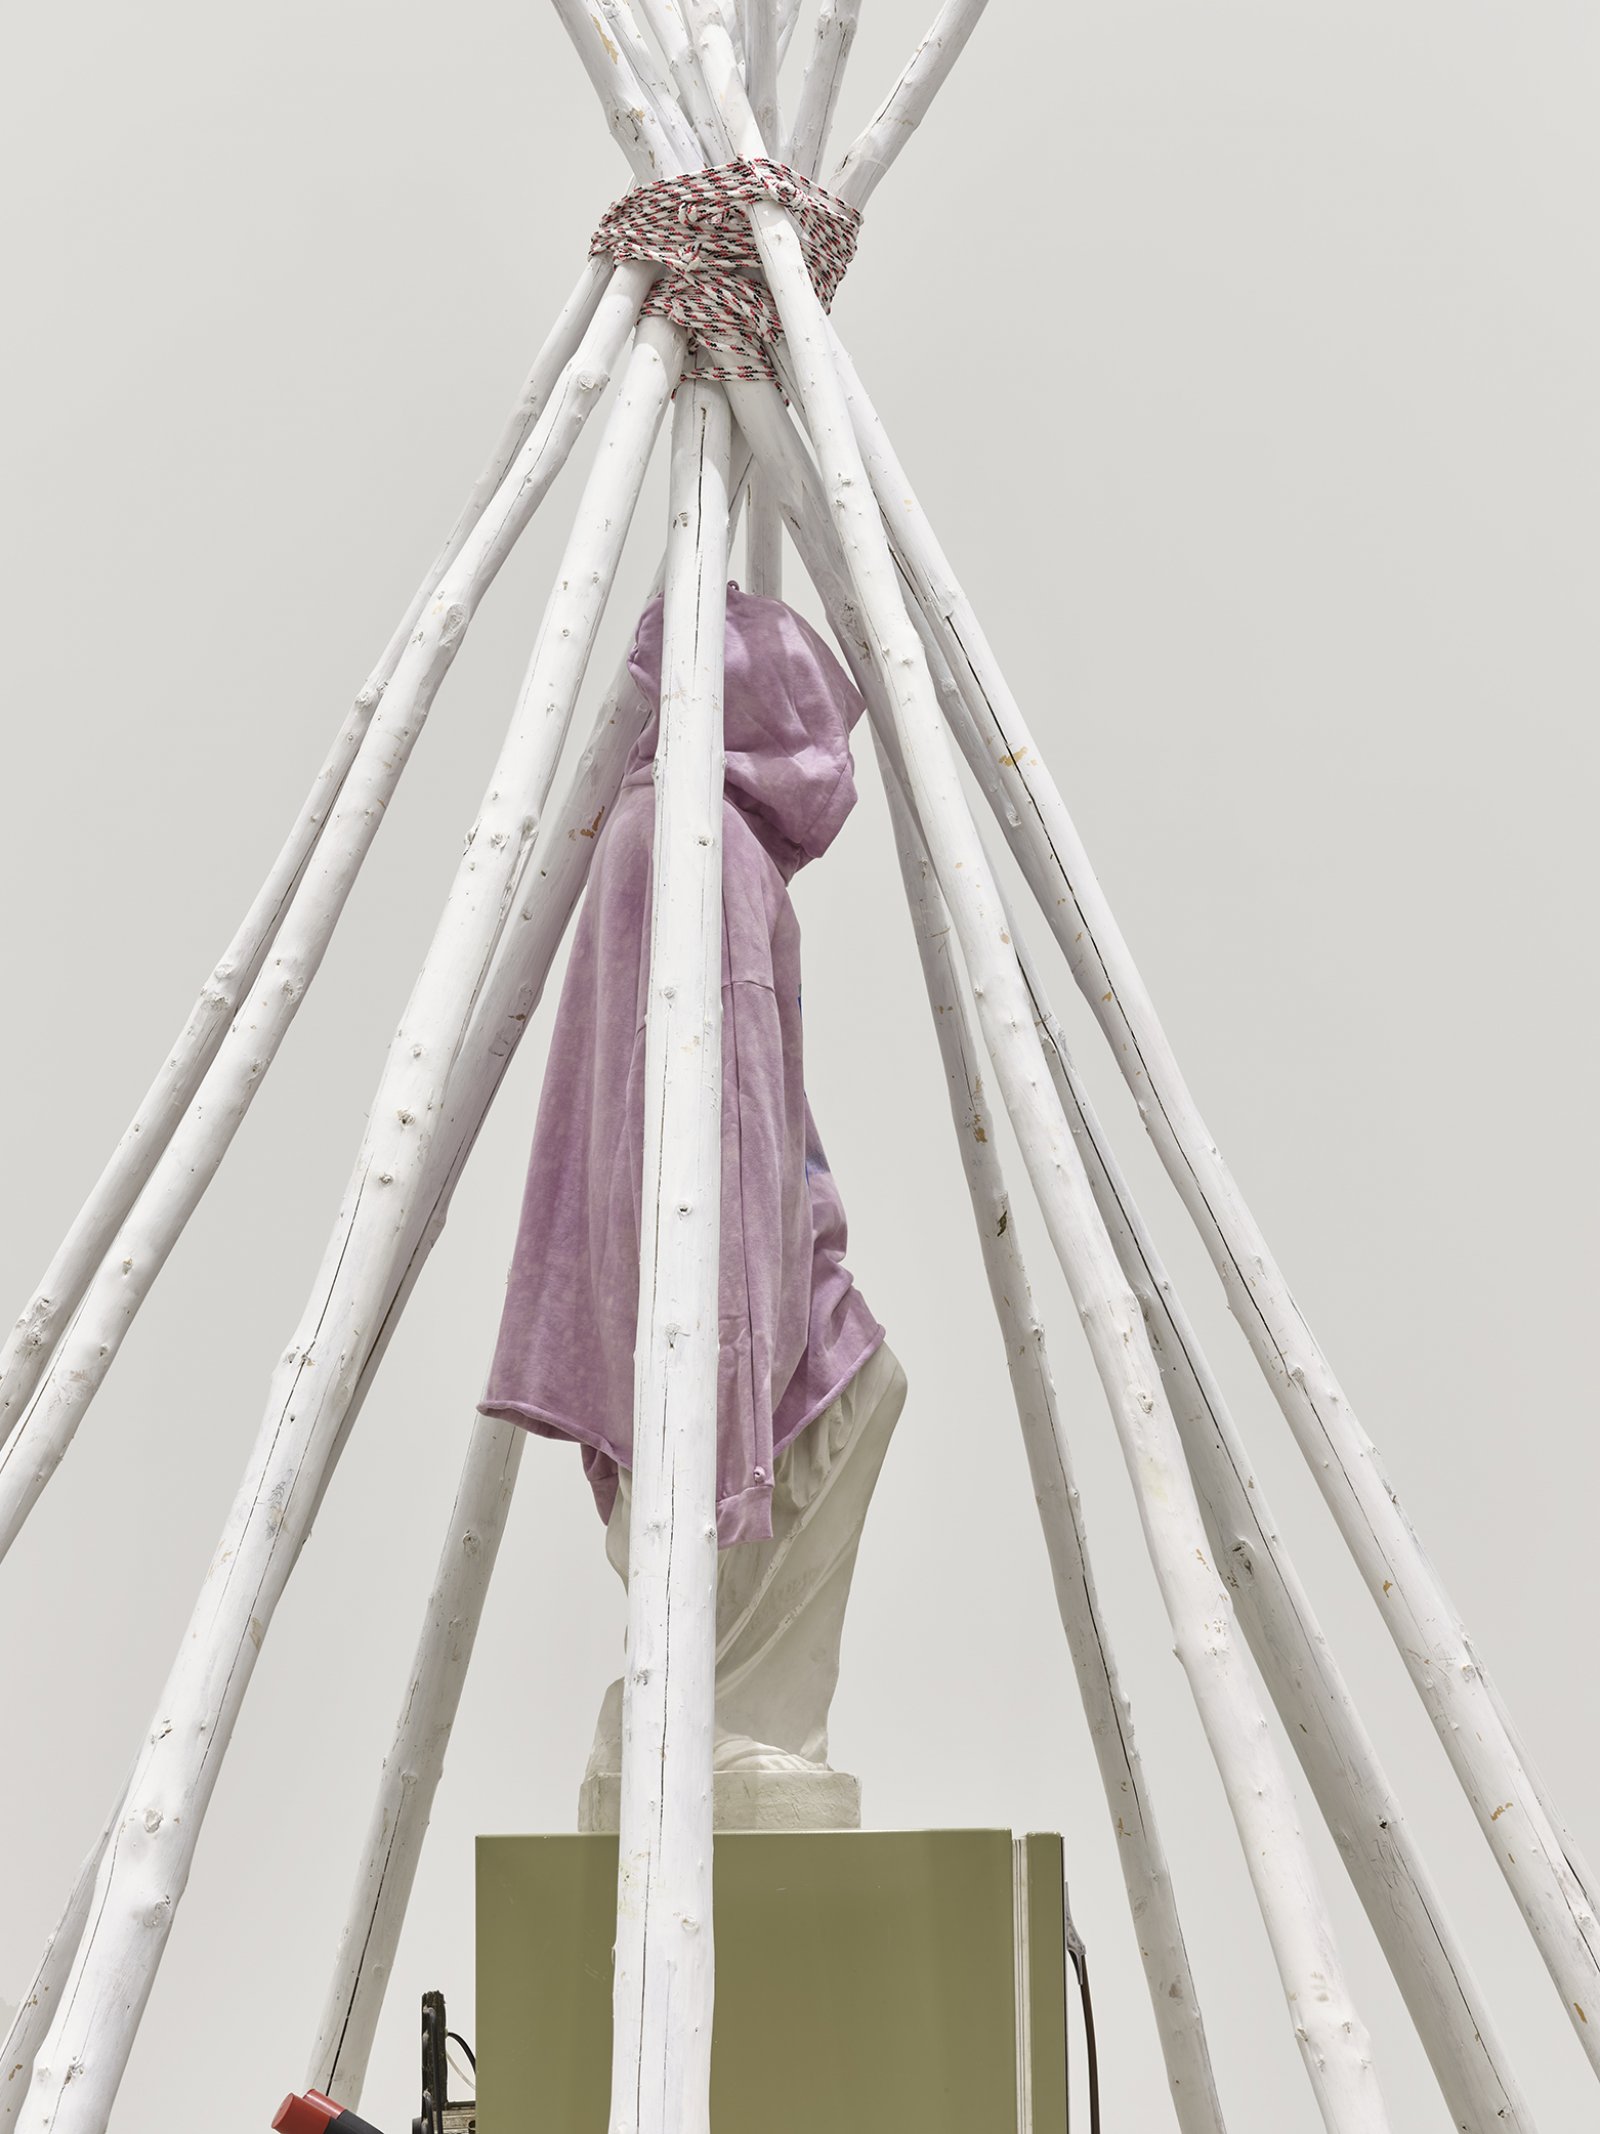 Duane Linklater, what grief conjures (detail), 2020, teepee poles, paint, nylon rope, wooden pallet, refrigerator, tie-down straps, hand truck, plastic statue, handmade hoodie, cochineal dye, silkscreen, 249 x 160 x 160 in. (632 x 406 x 406 cm) by Duane Linklater